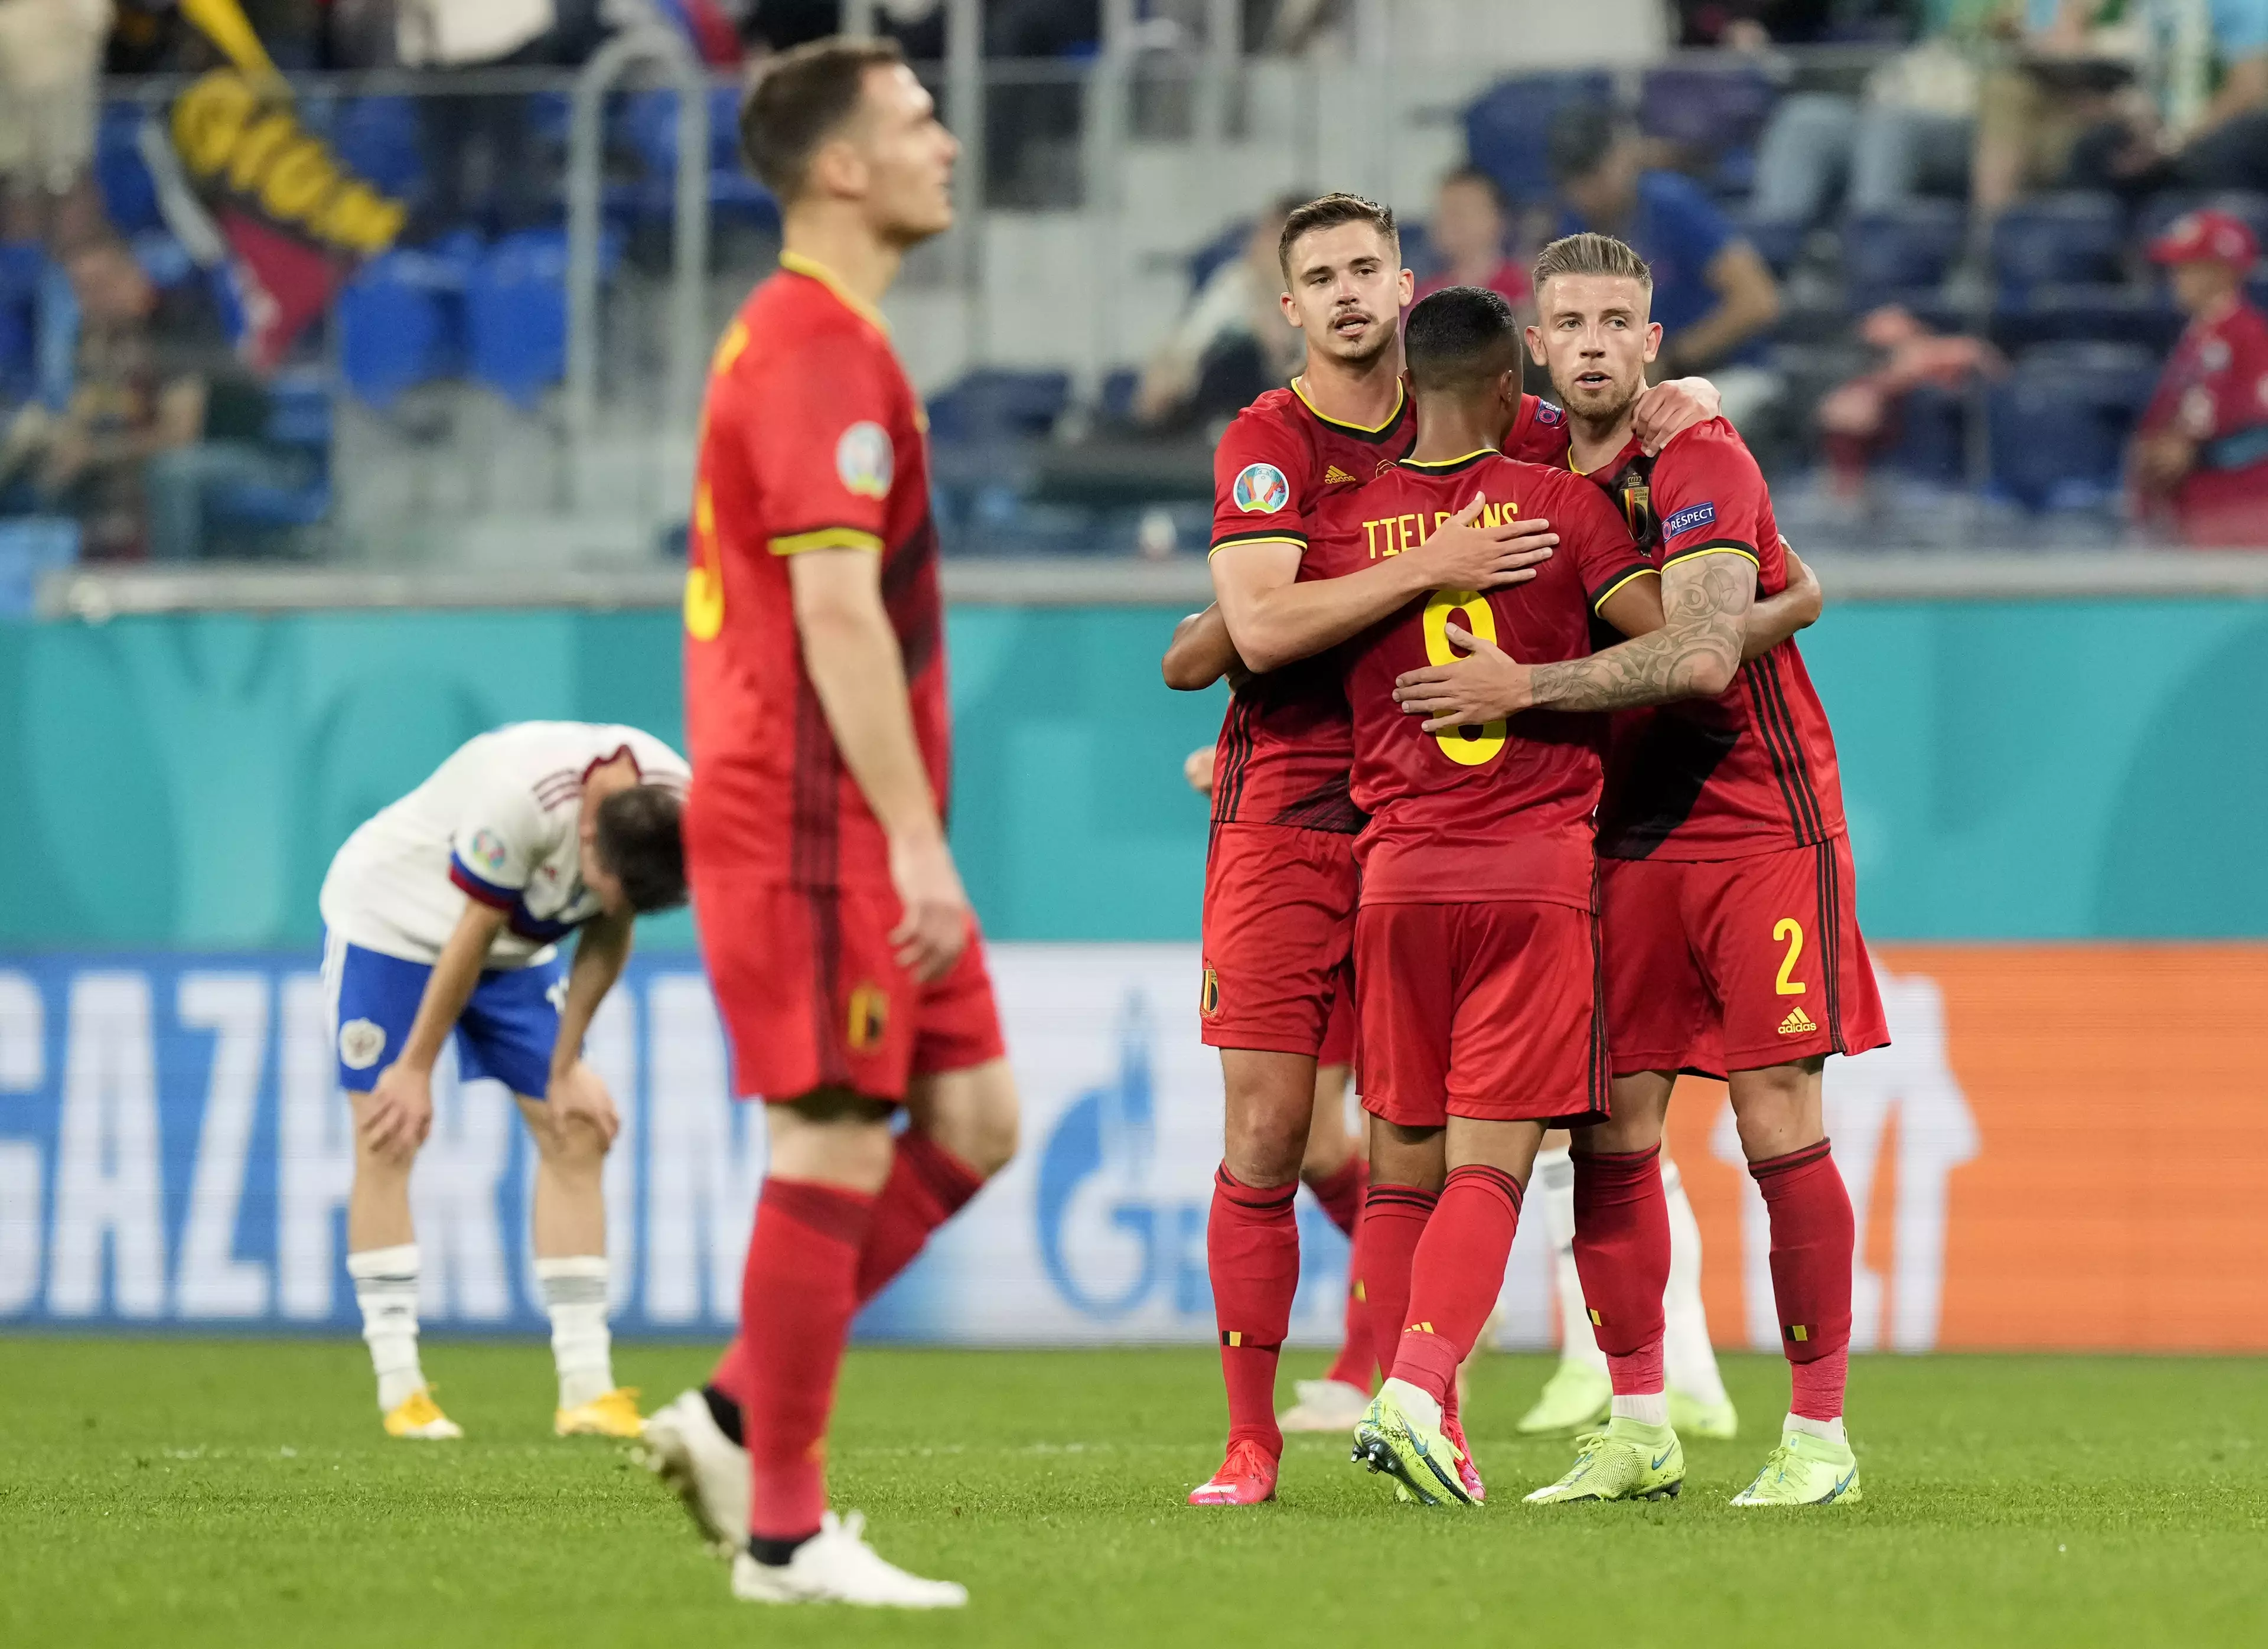 Belgium are one of the favourites to win Euro 2020